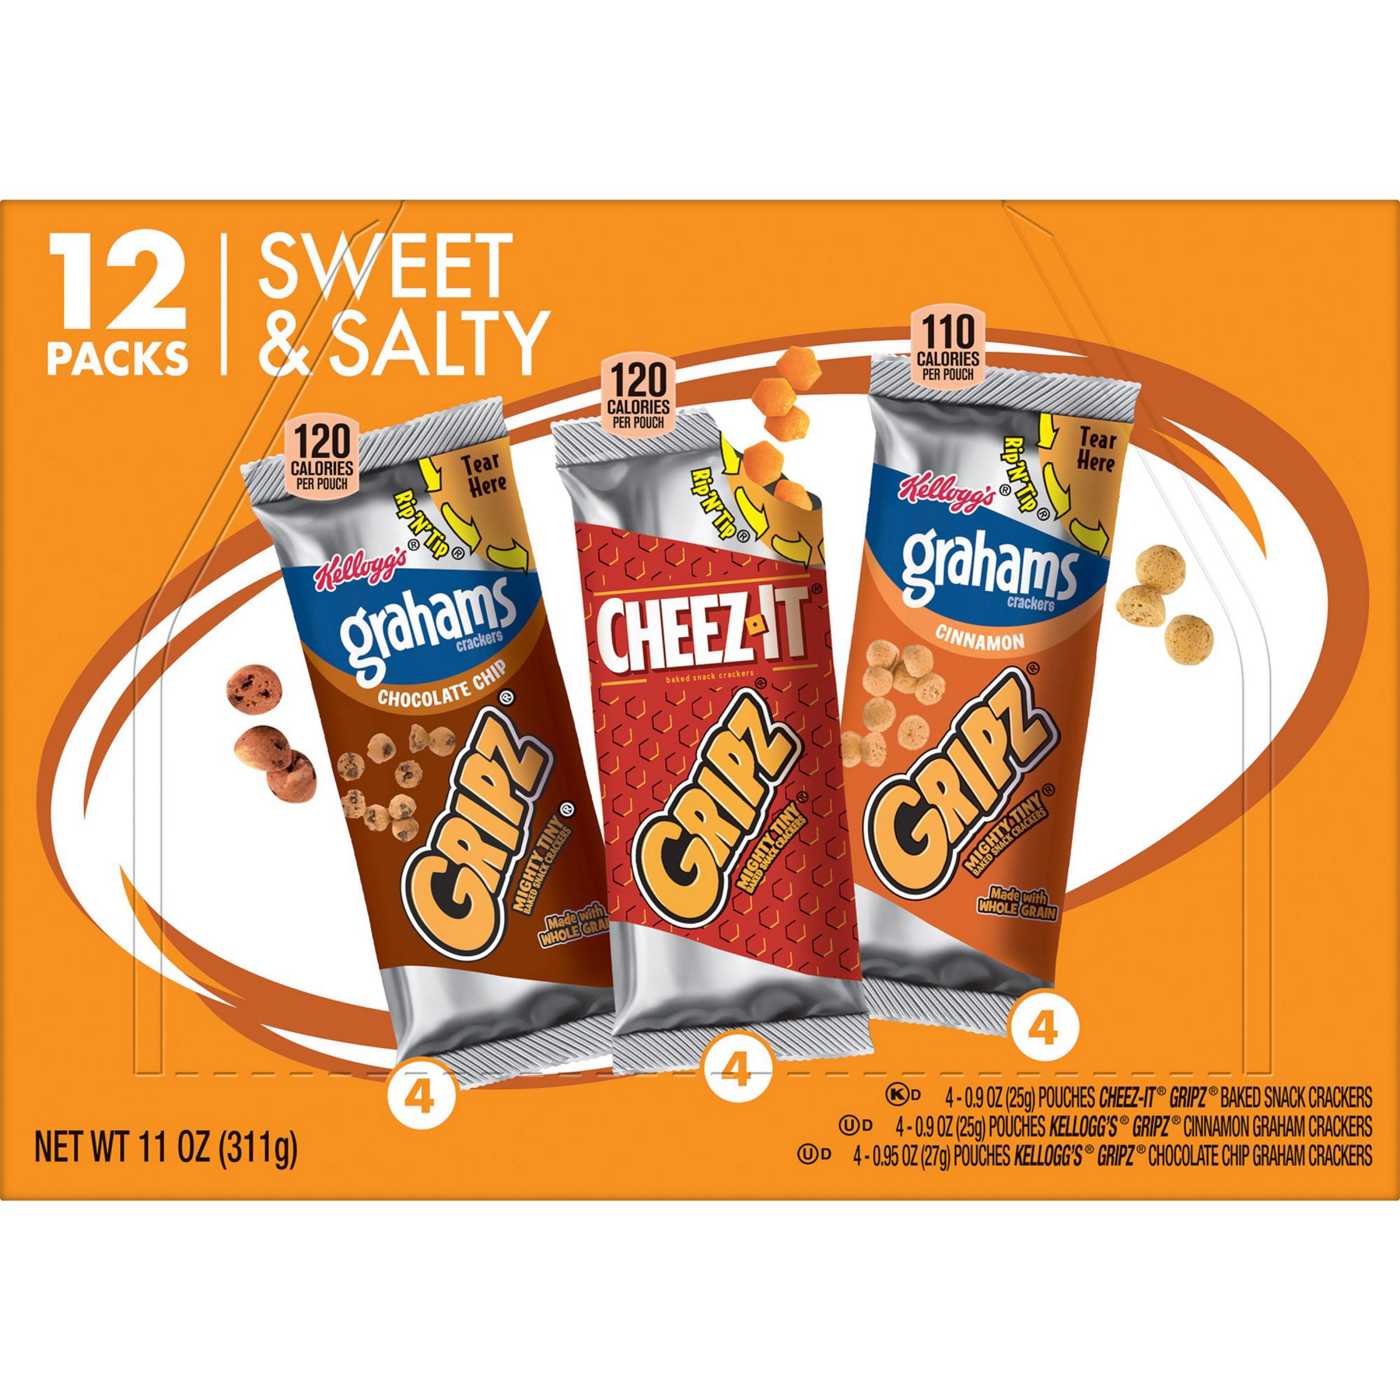 Kellogg's Gripz Variety Pack Tiny Baked Snack Crackers; image 8 of 10